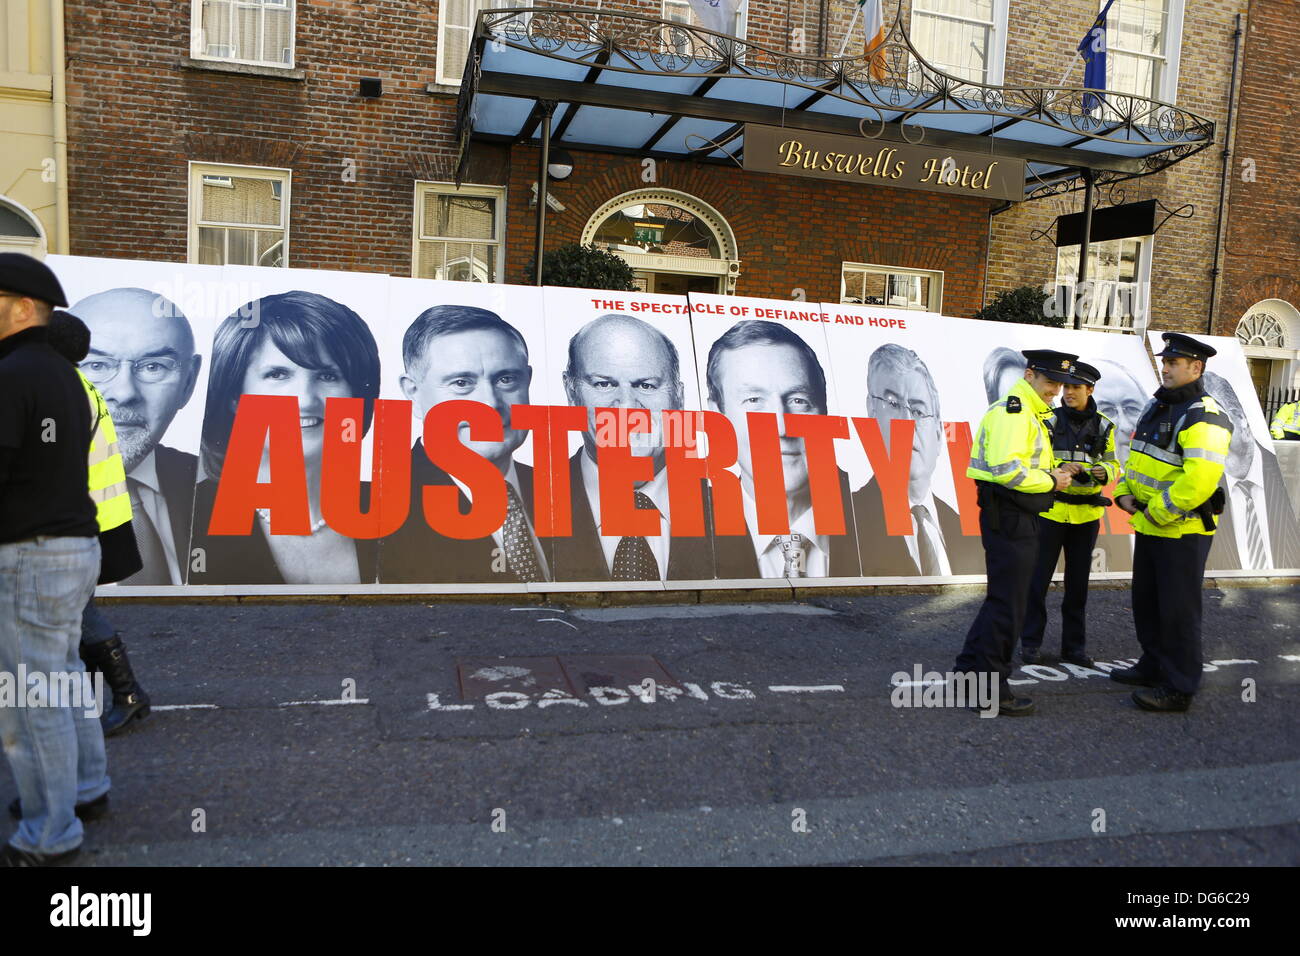 Dublin, Ireland. 15th October 2013 The Spectacle of Defiance & Hope have put up large pictures of government ministers with the slogan 'Austerity kills' written over them. People have assembled from early morning outside the Dail (Irish Parliament) on the day Finance minister Michael Noonan is going to present the Budget for 2014. They protest against the increase in taxes and the cuts in government spending. Credit:  Michael Debets/Alamy Live News Stock Photo